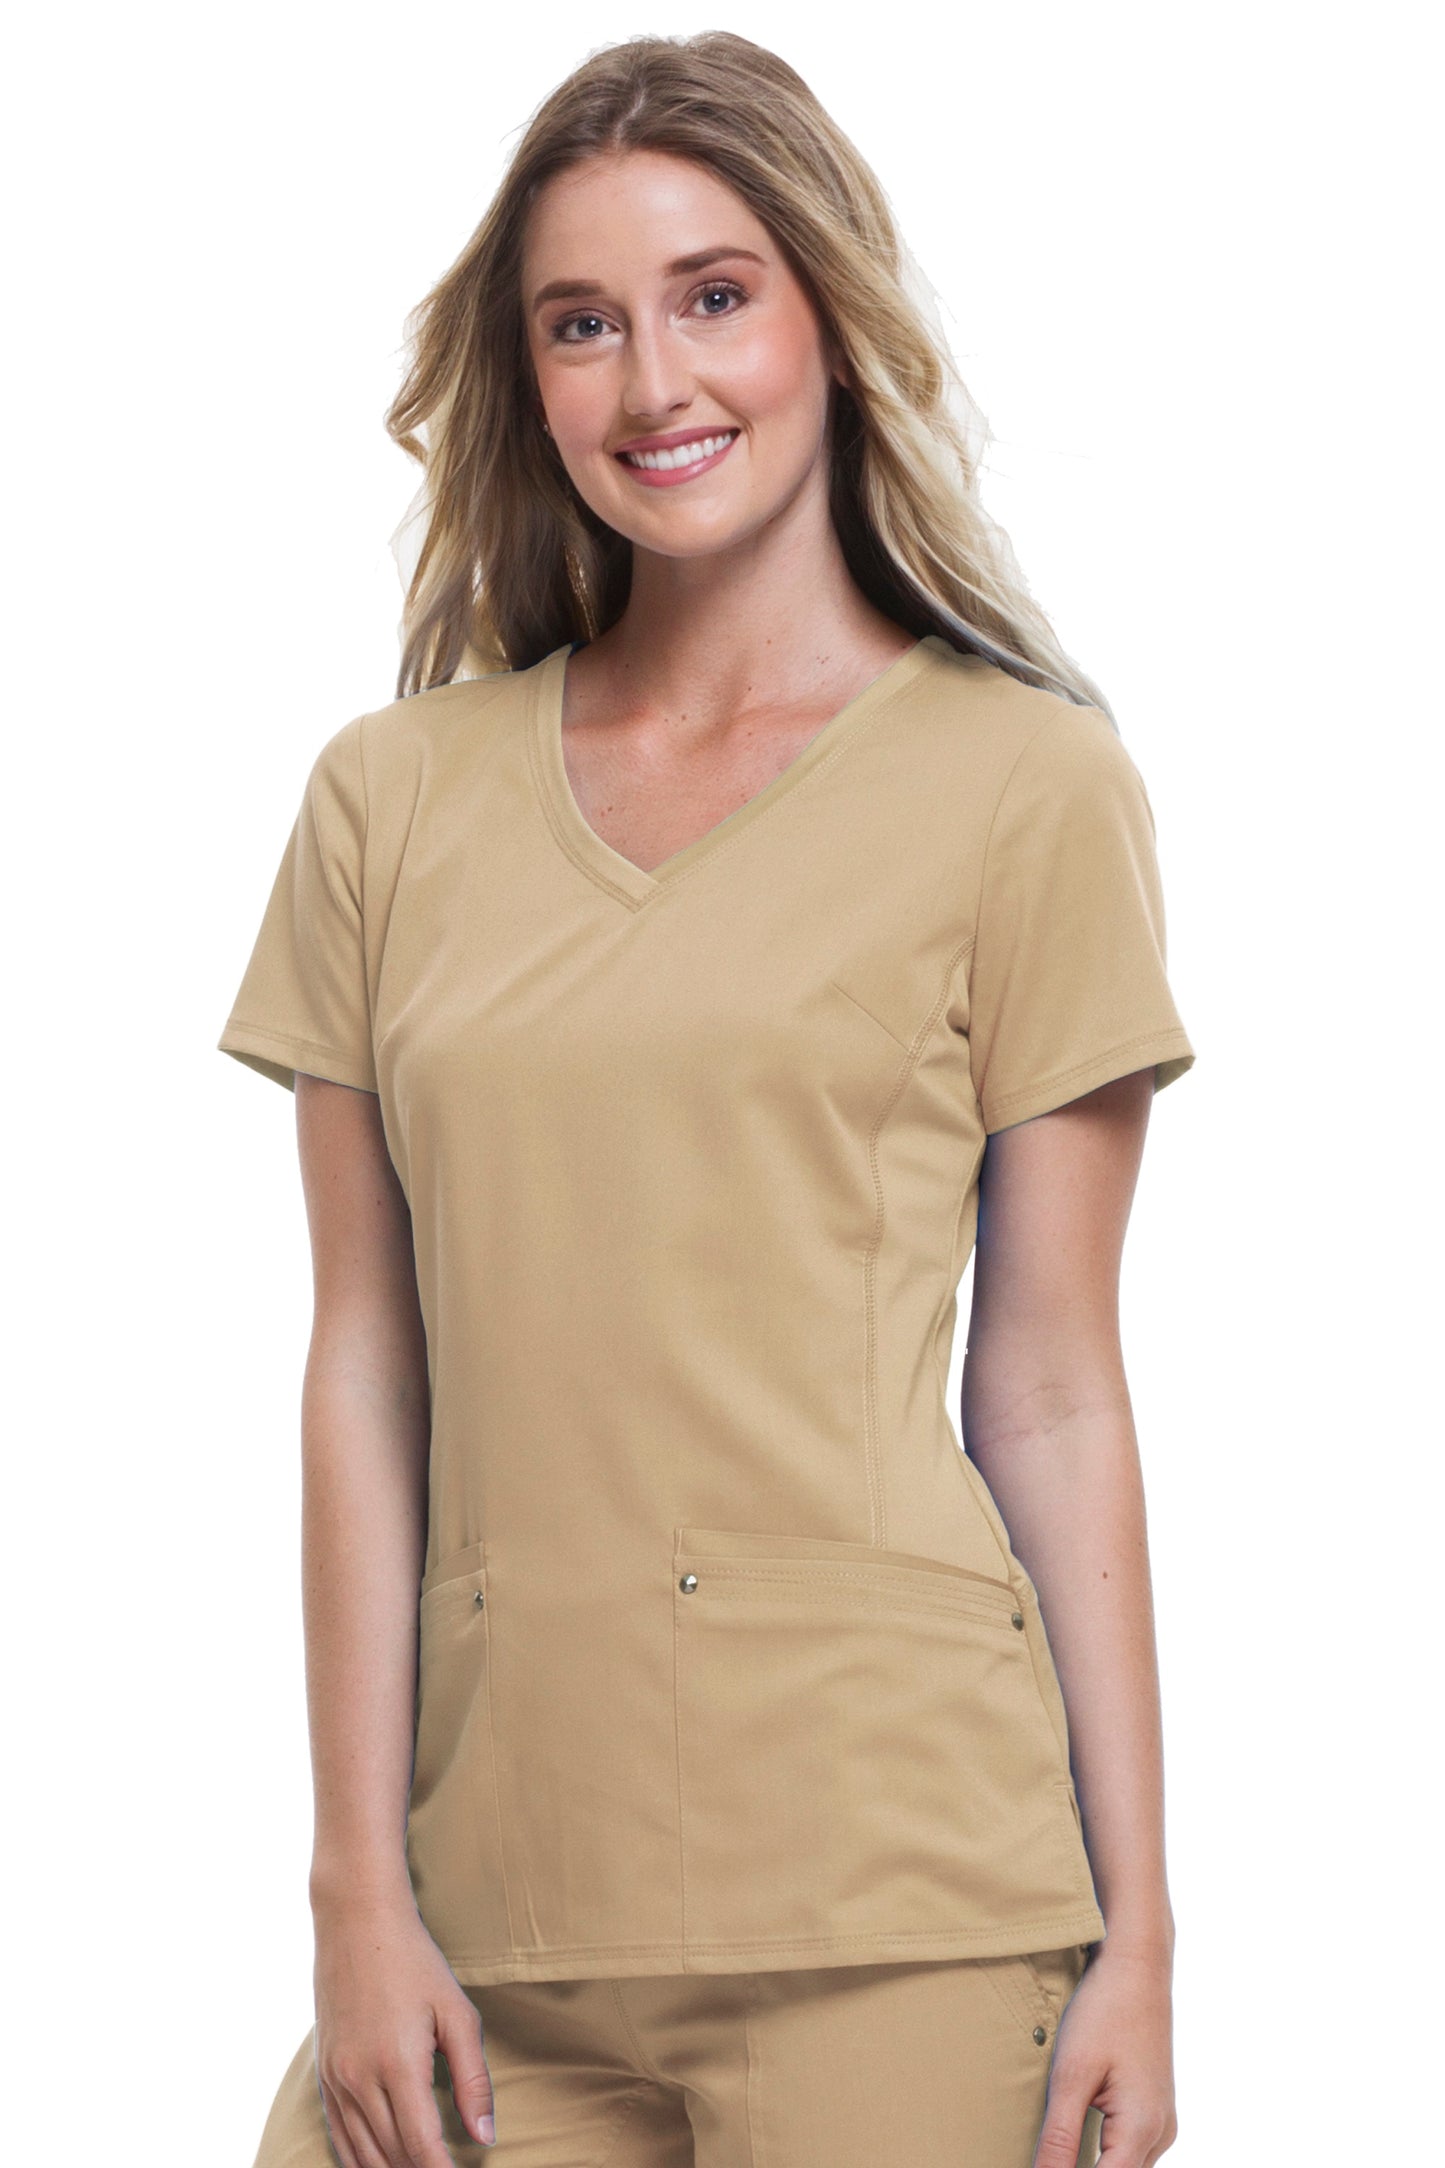 Healing Hands Purple Label Juliet Scrub Top in Khaki at Parker's Clothing and Shoes.